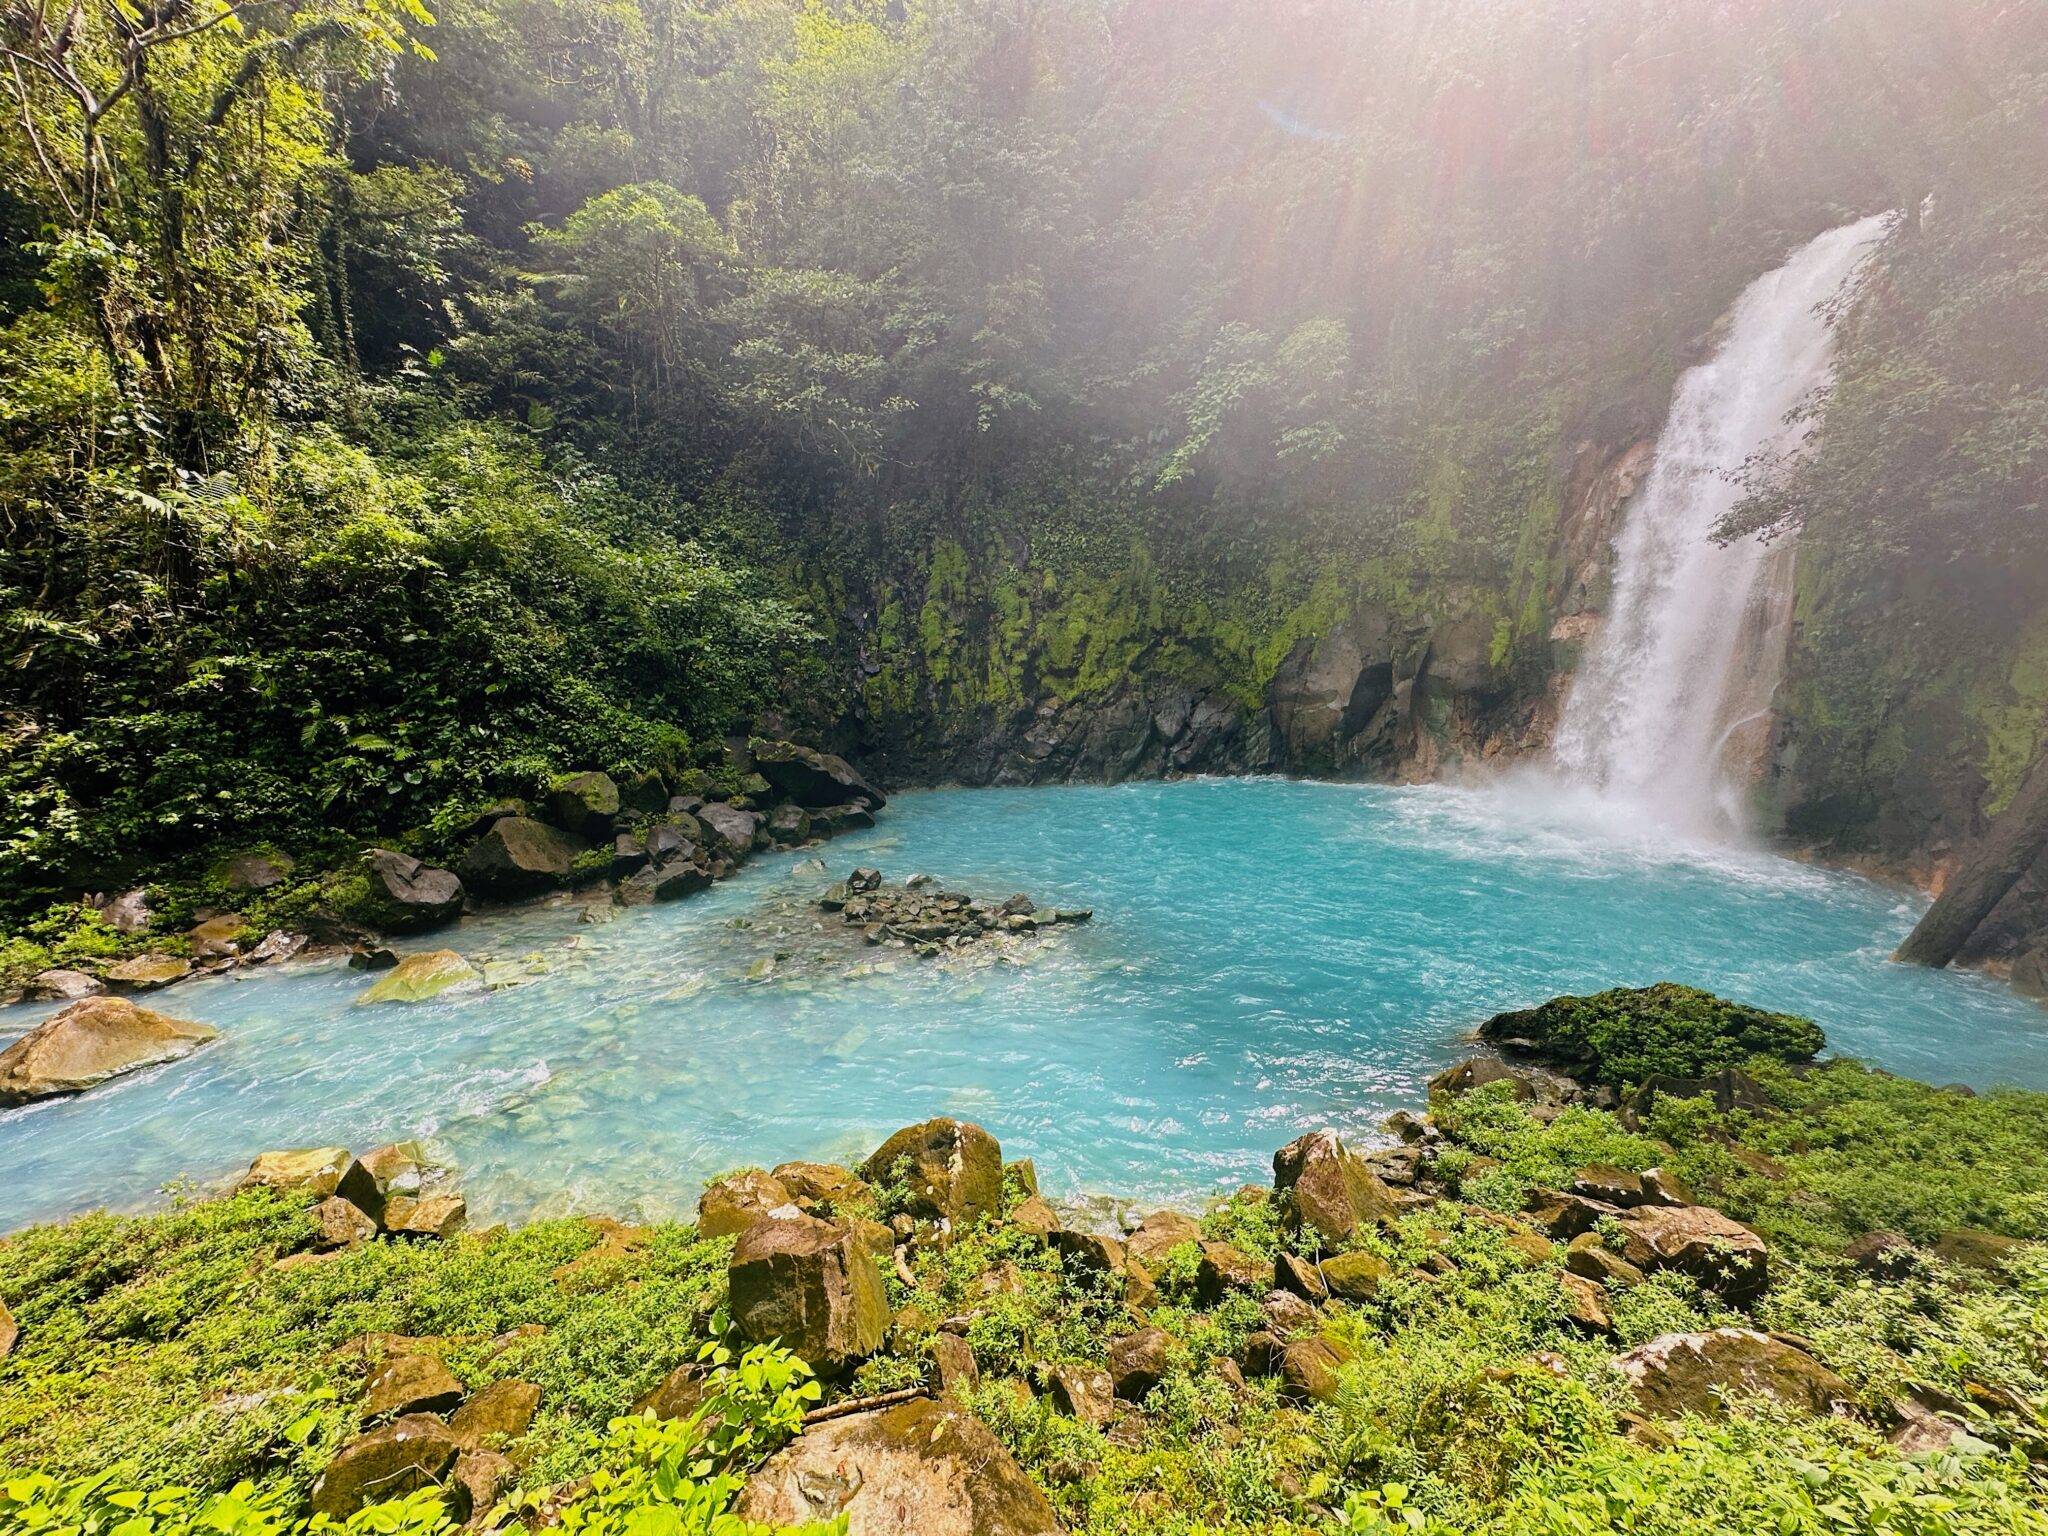 Guide to Visiting Rio Celeste Waterfall Costa Rica